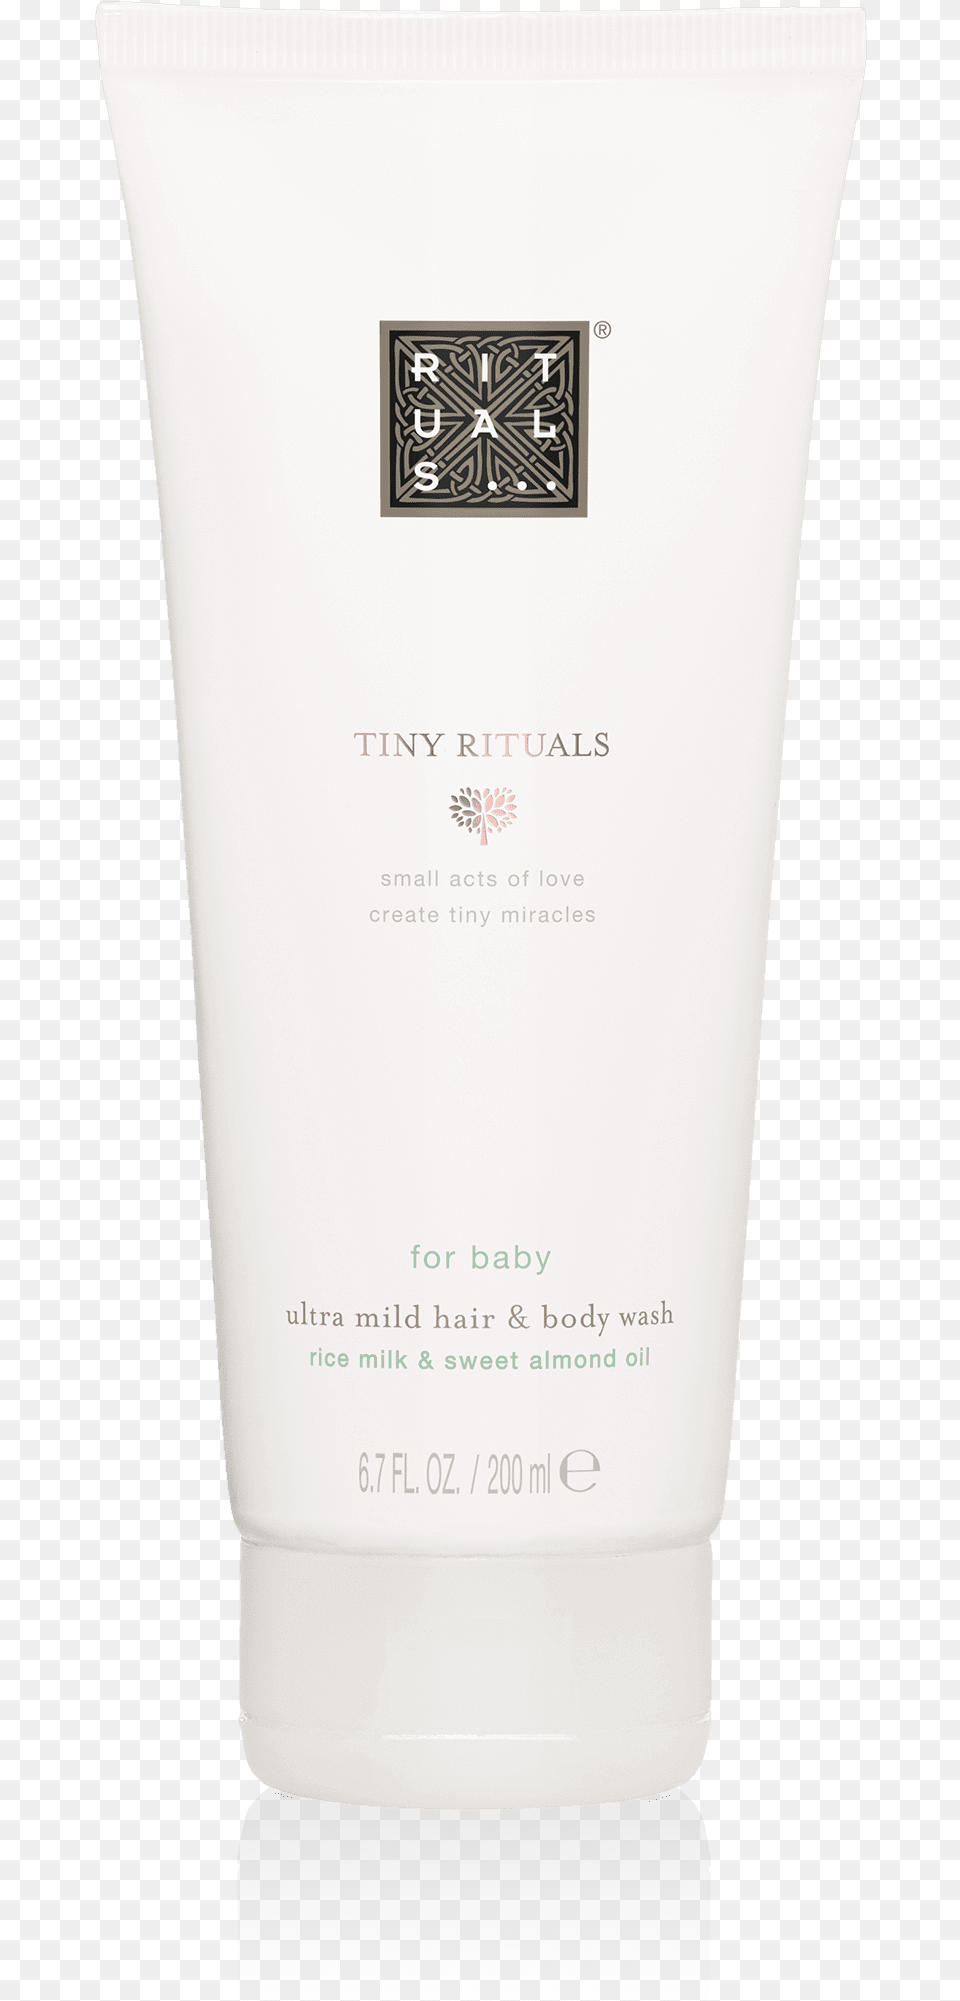 Tiny Rituals Baby Hair Amp Body Wash Forever Living Products Marine Mask, Bottle, Lotion, Aftershave, Cosmetics Png